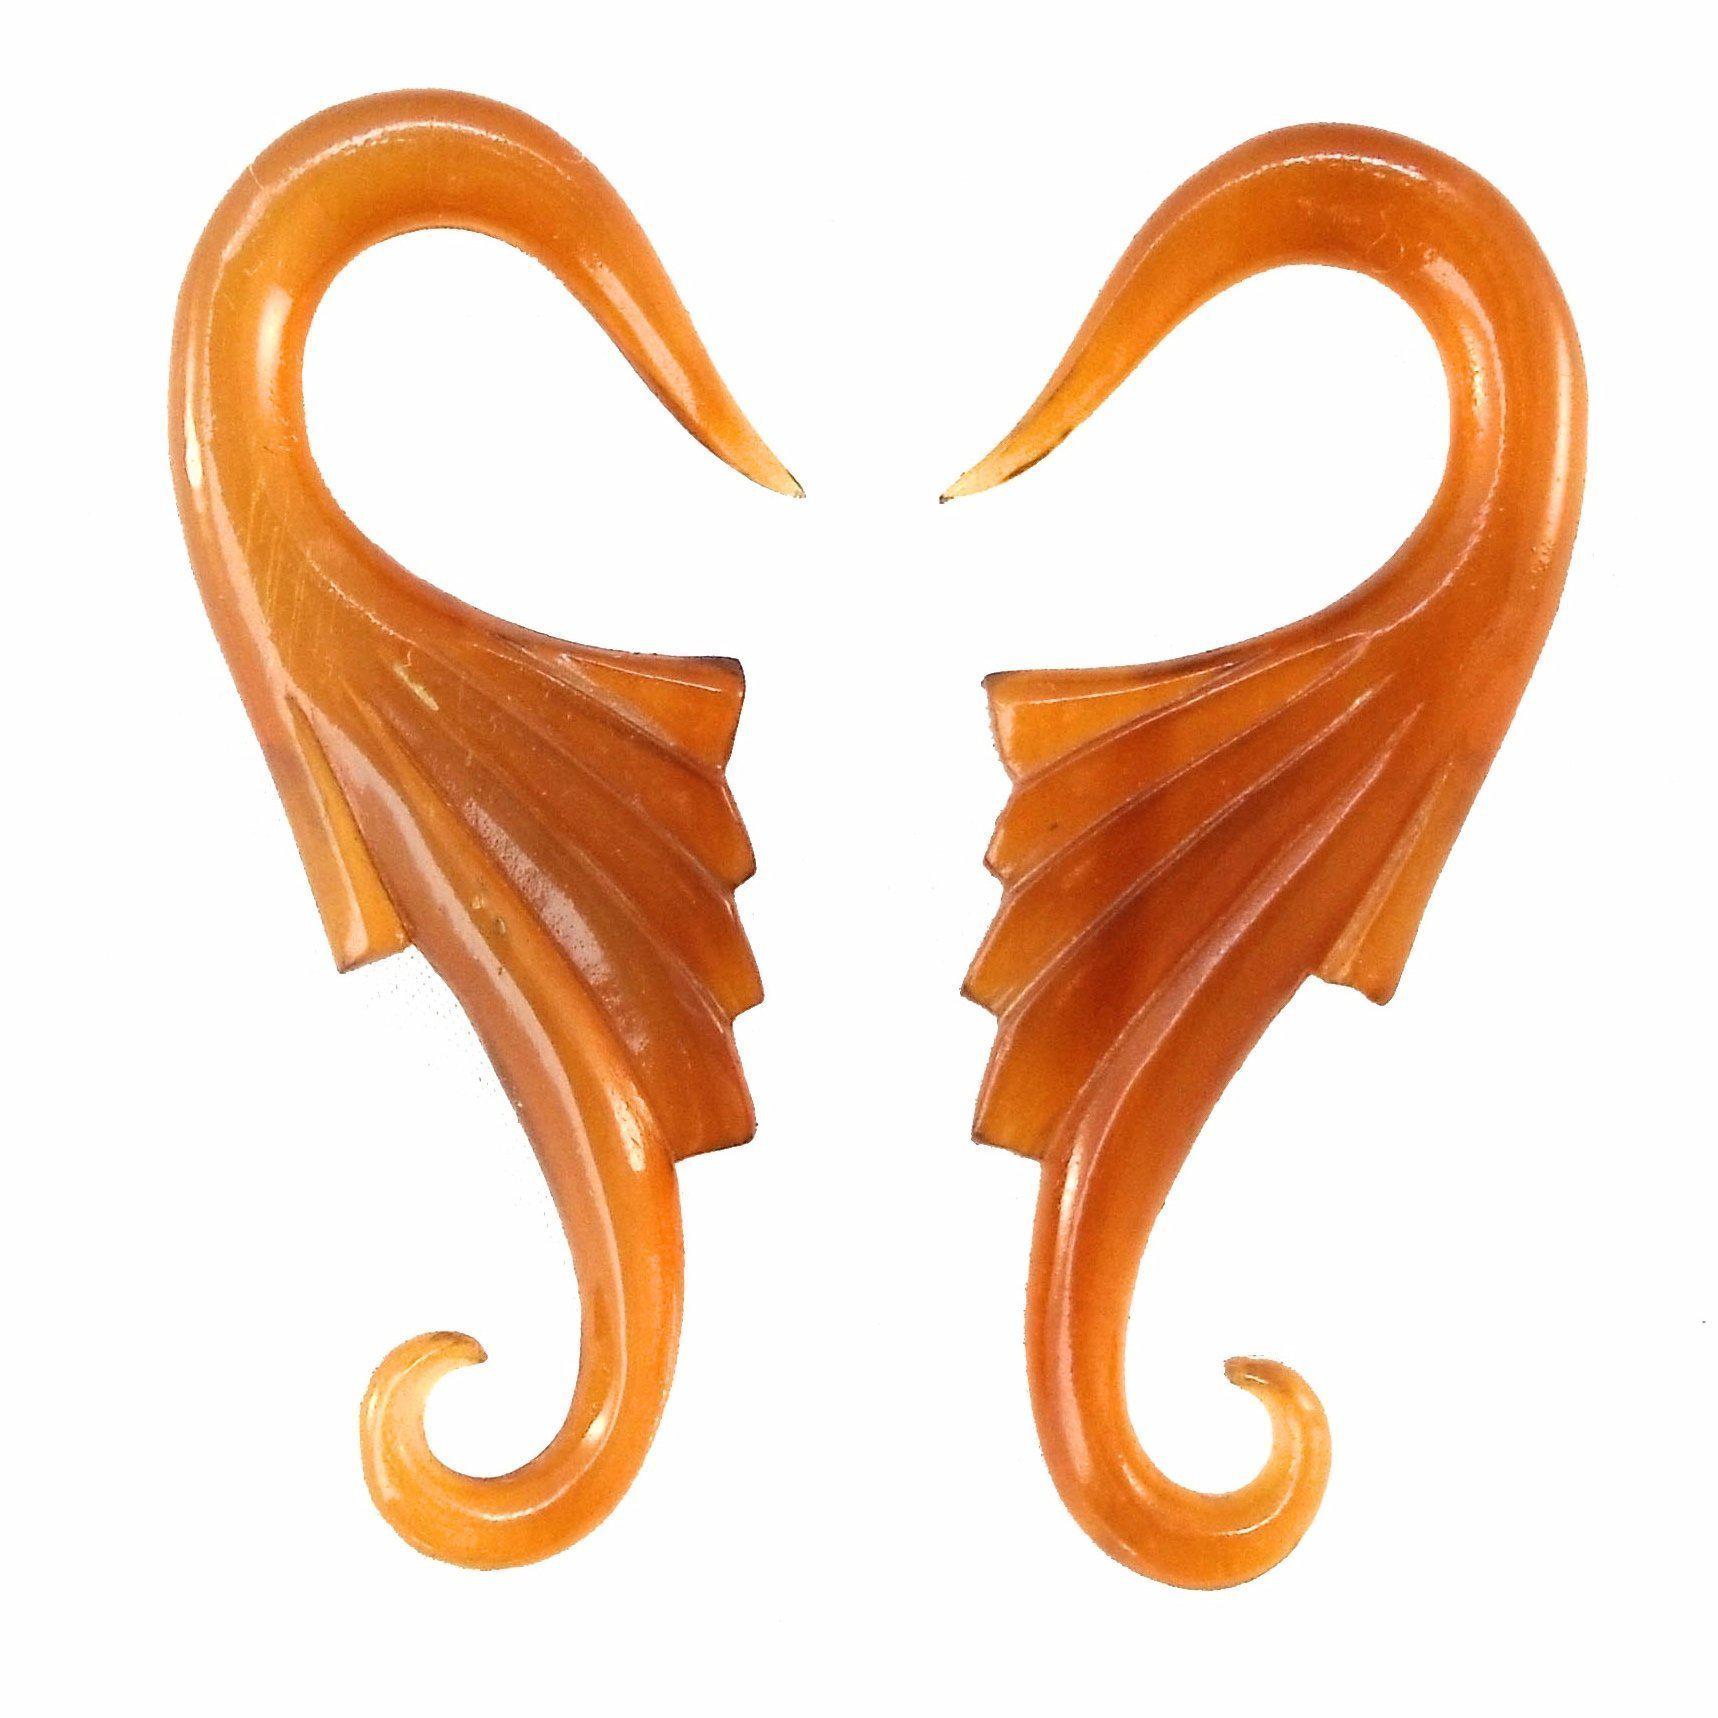 Body Jewelry :|: Nouveau Wings. Amber Horn 4g, Organic Body Jewelry. | Tribal Body Jewelry